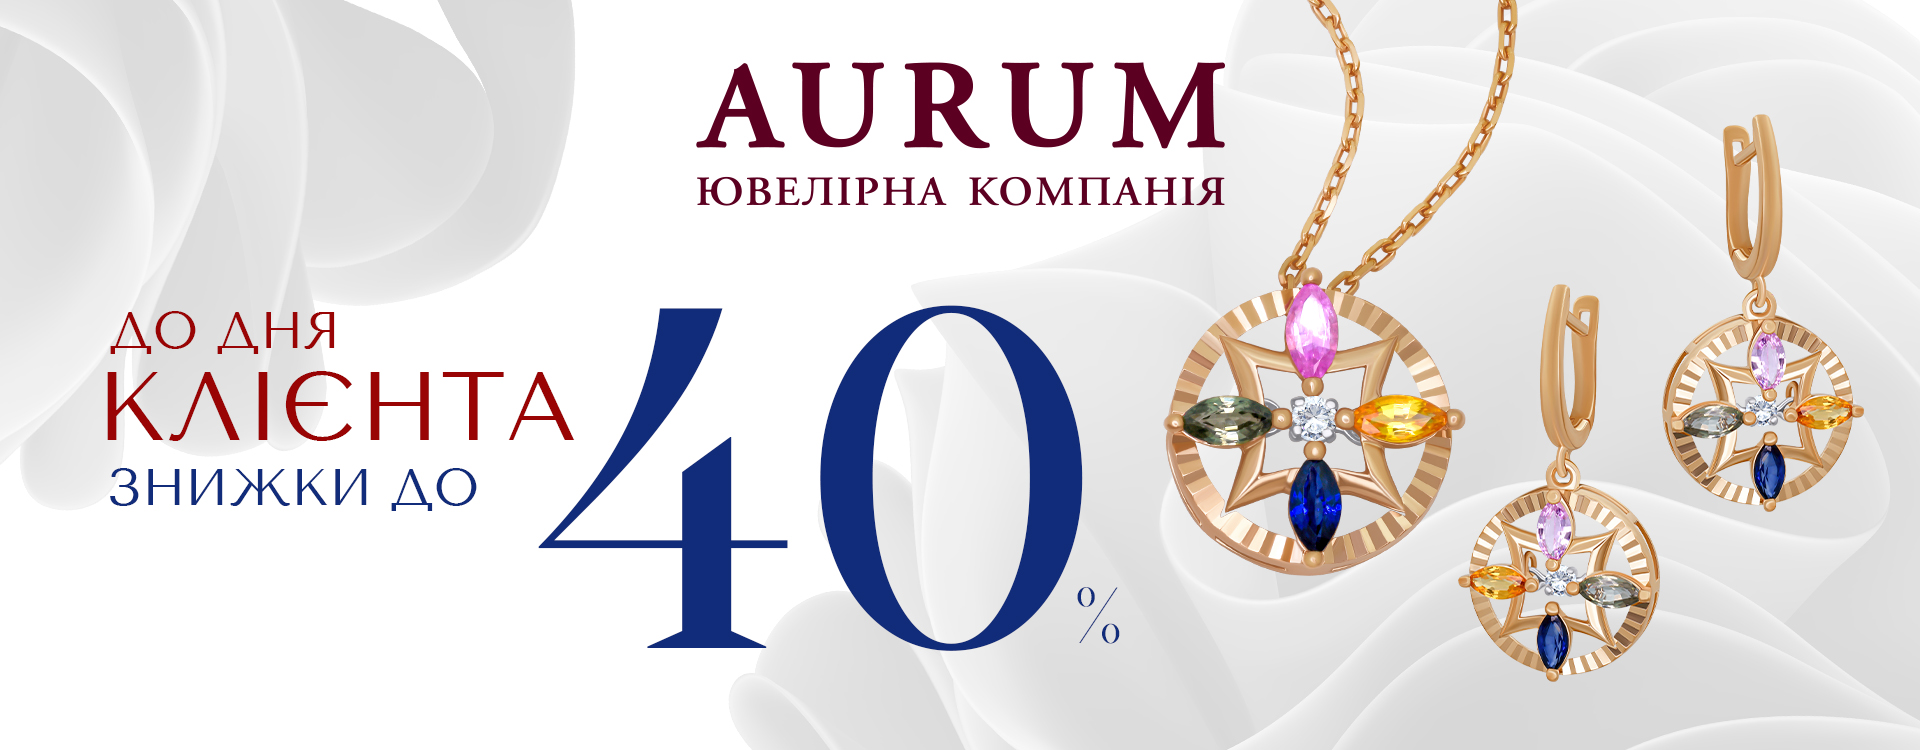 Customer Day at AURUM discounts up to 40%